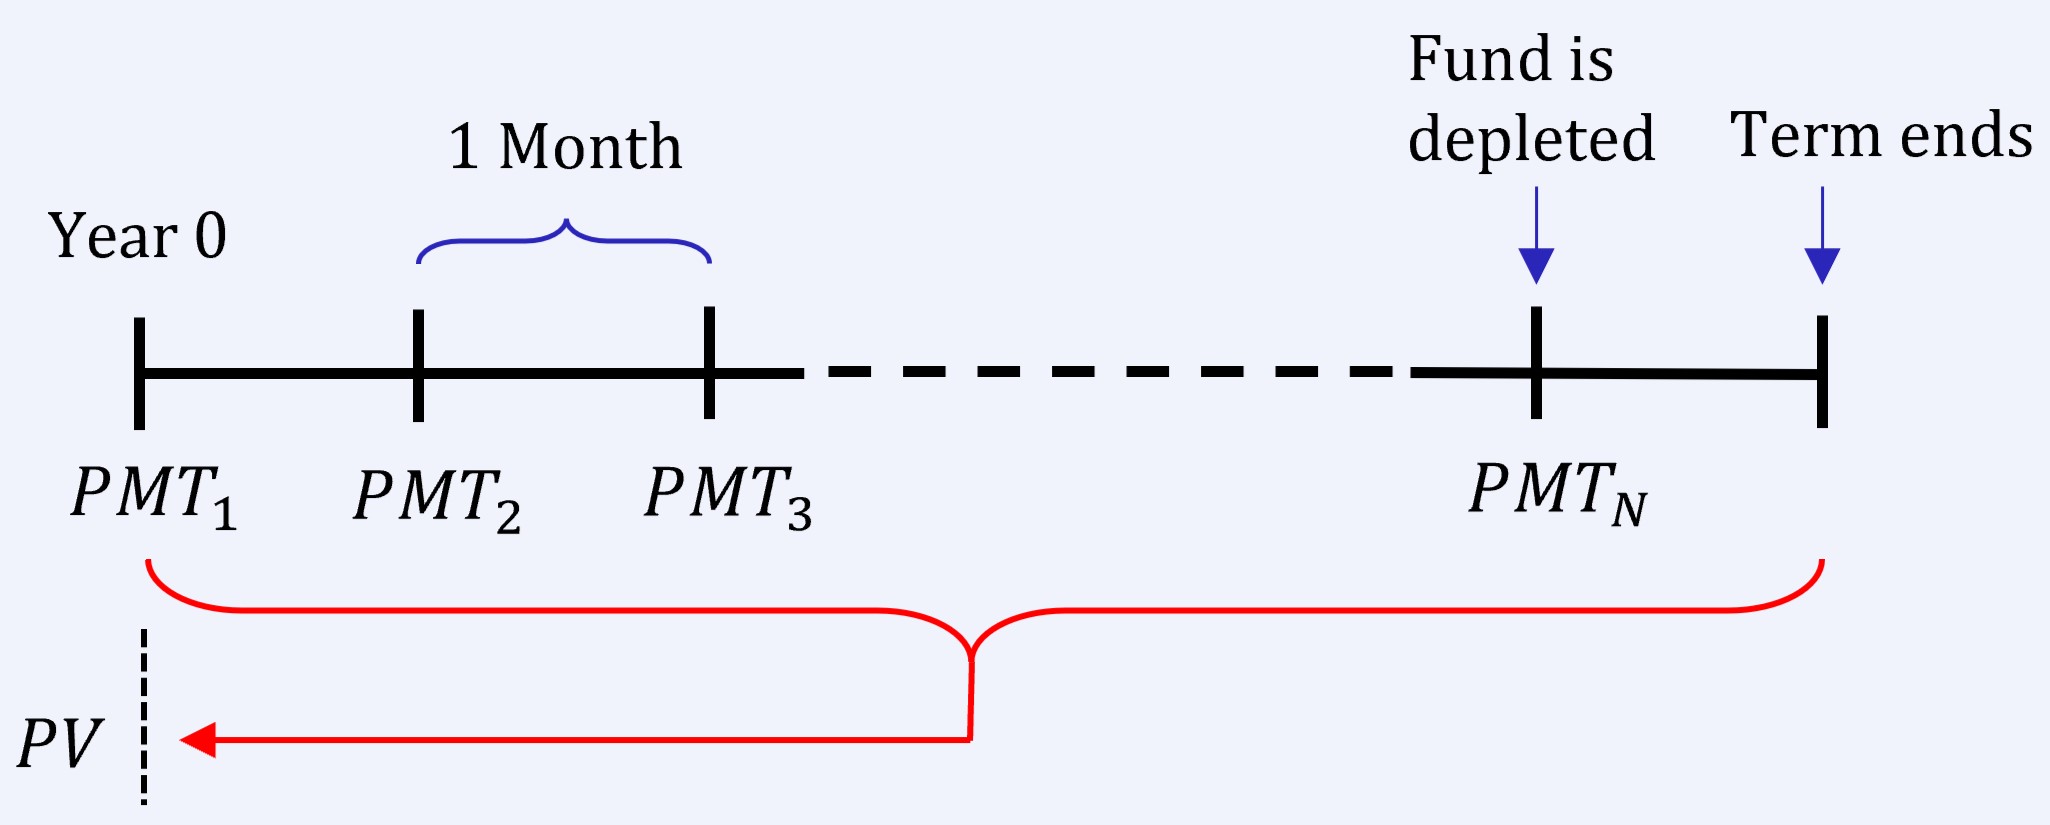 Timeline illustrating withdrawals (PMTs) from a fund starting at Year 0 and continuing until one month before the annuity's end. A marker indicates the final withdrawal and depletion of the fund one period before the annuity term concludes.